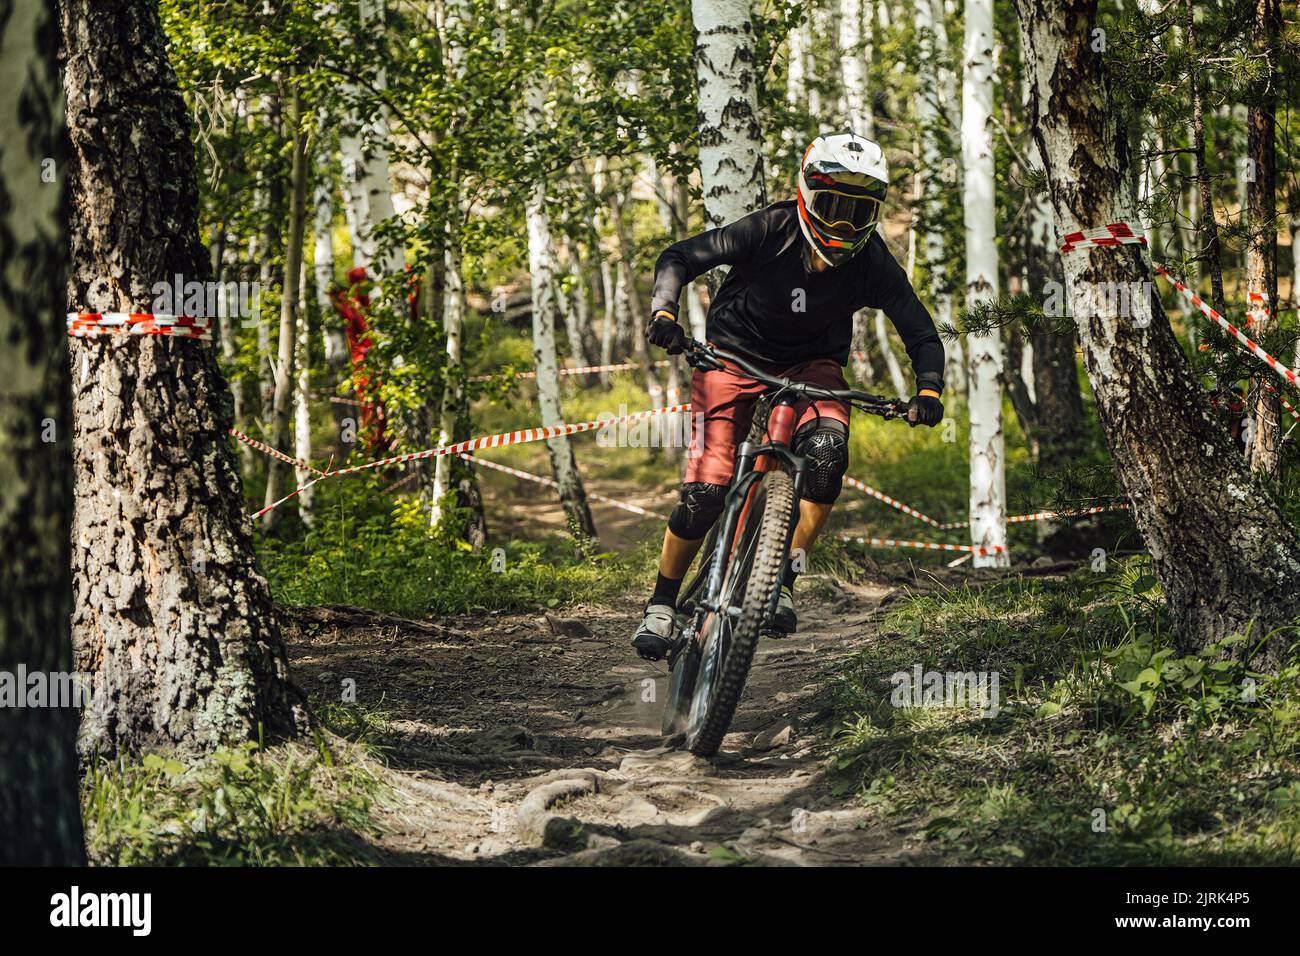 rider of mountain bike downhill forest trail Stock Photo